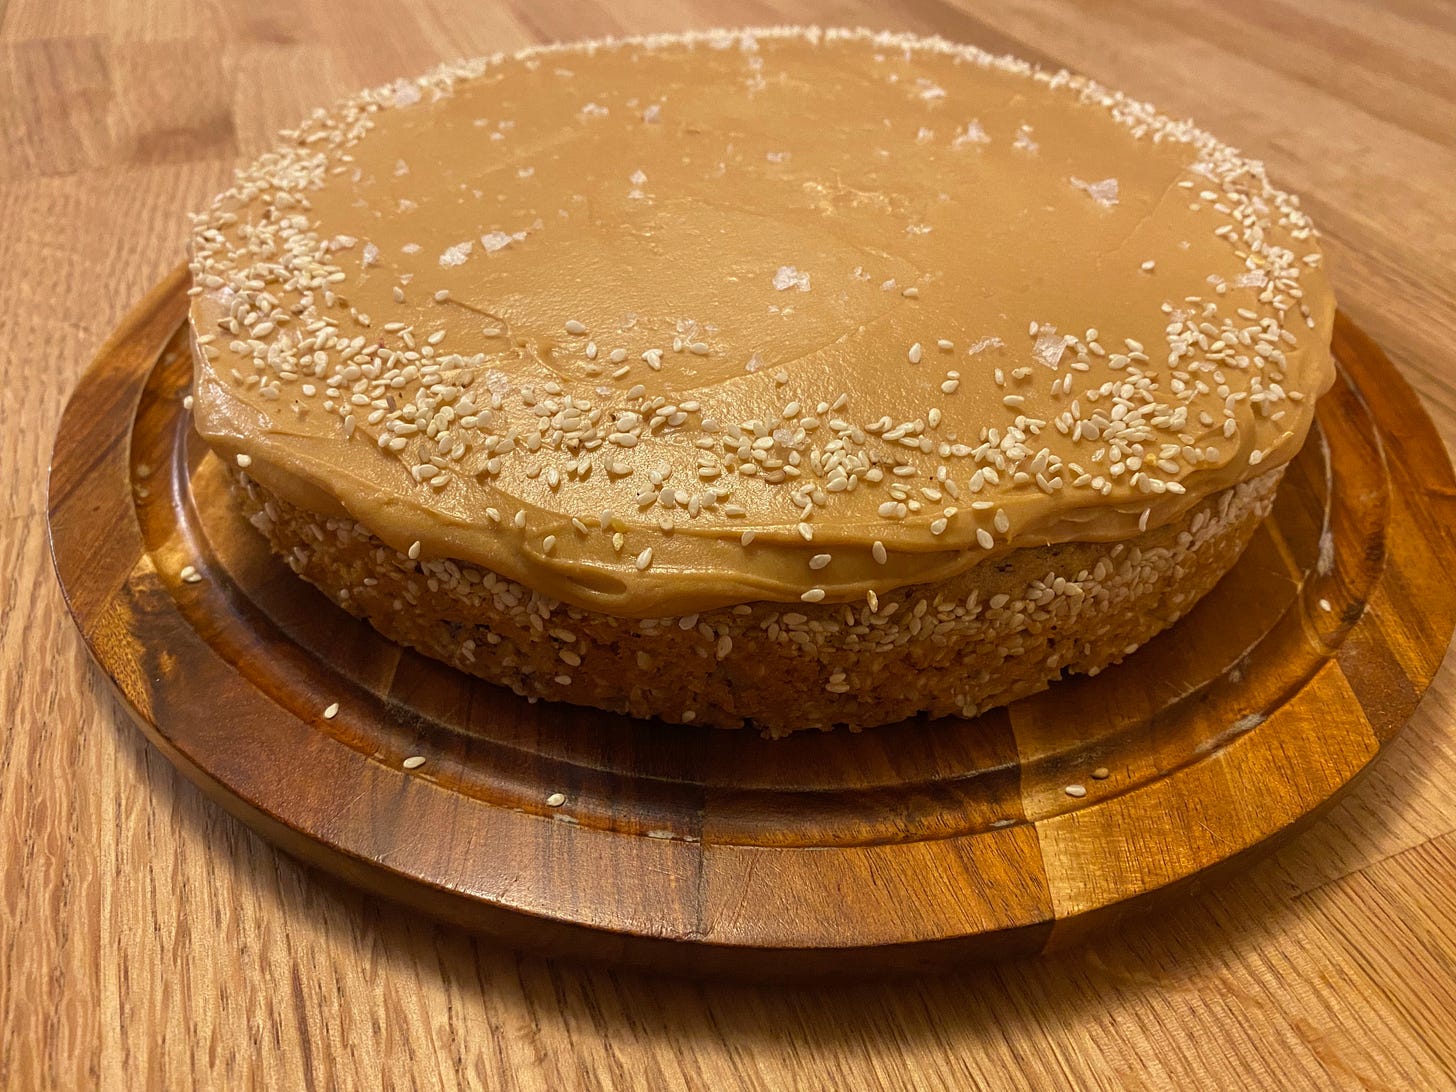 A round cake with its sides covered in sesame seeds sits on a wooden platter. The top is coasted in a thick frosting and sprinkled with sesame seeds.